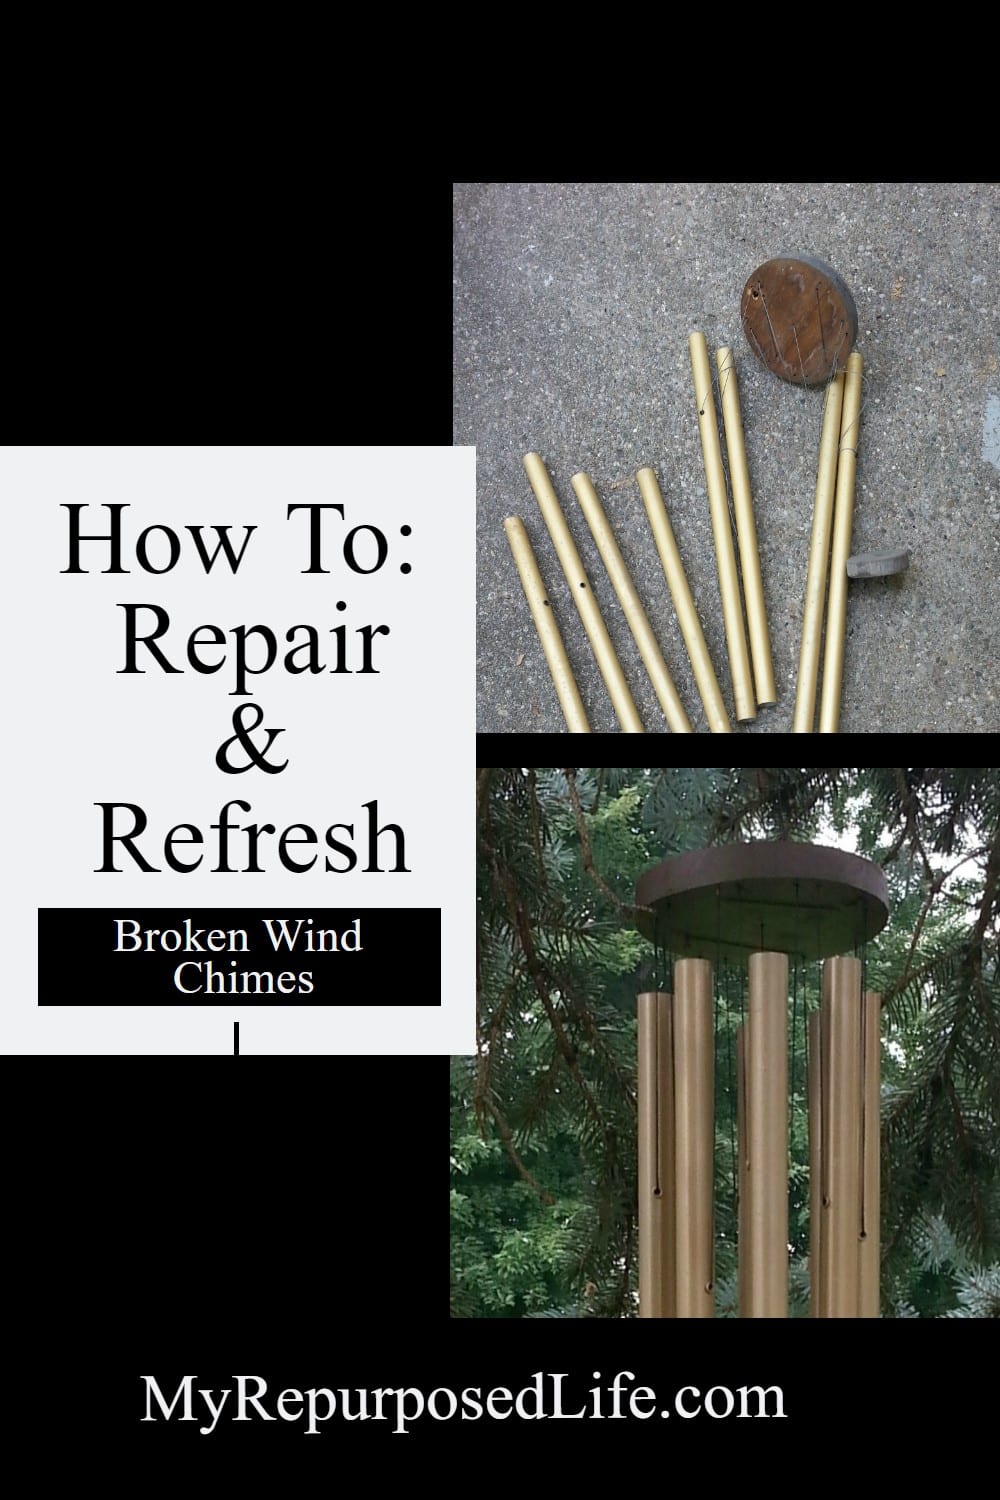 How to repair, refresh, restring a broken wind chime. Tips for the best string, paint and stain to use to save that old wind chime. #MyRepurposedLife #broken #windchime #makeover #spraypaint #stain #minwax #krylon via @repurposedlife